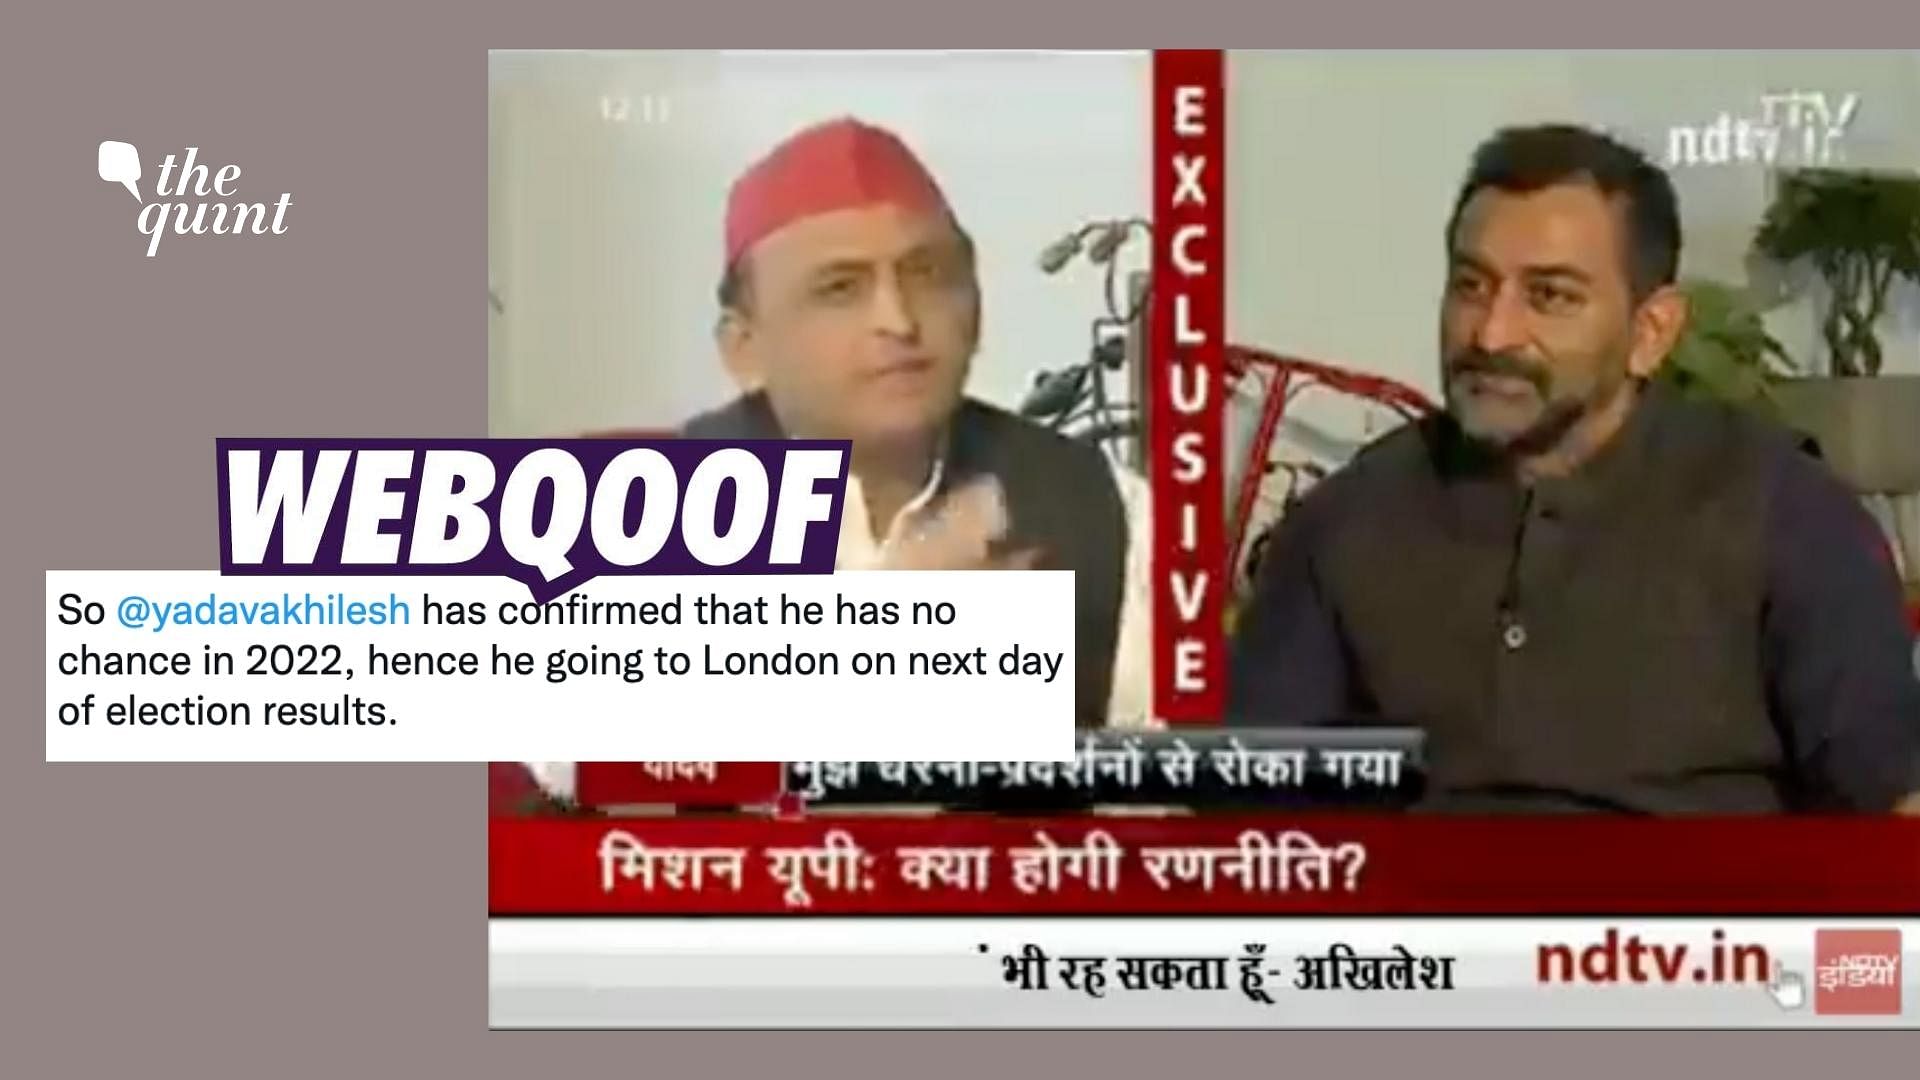 <div class="paragraphs"><p>The claim states that Yadav told NDTV's Sreenivasan Jain that he will leave for London once 2022 Uttar Pradesh elections are over.</p></div>